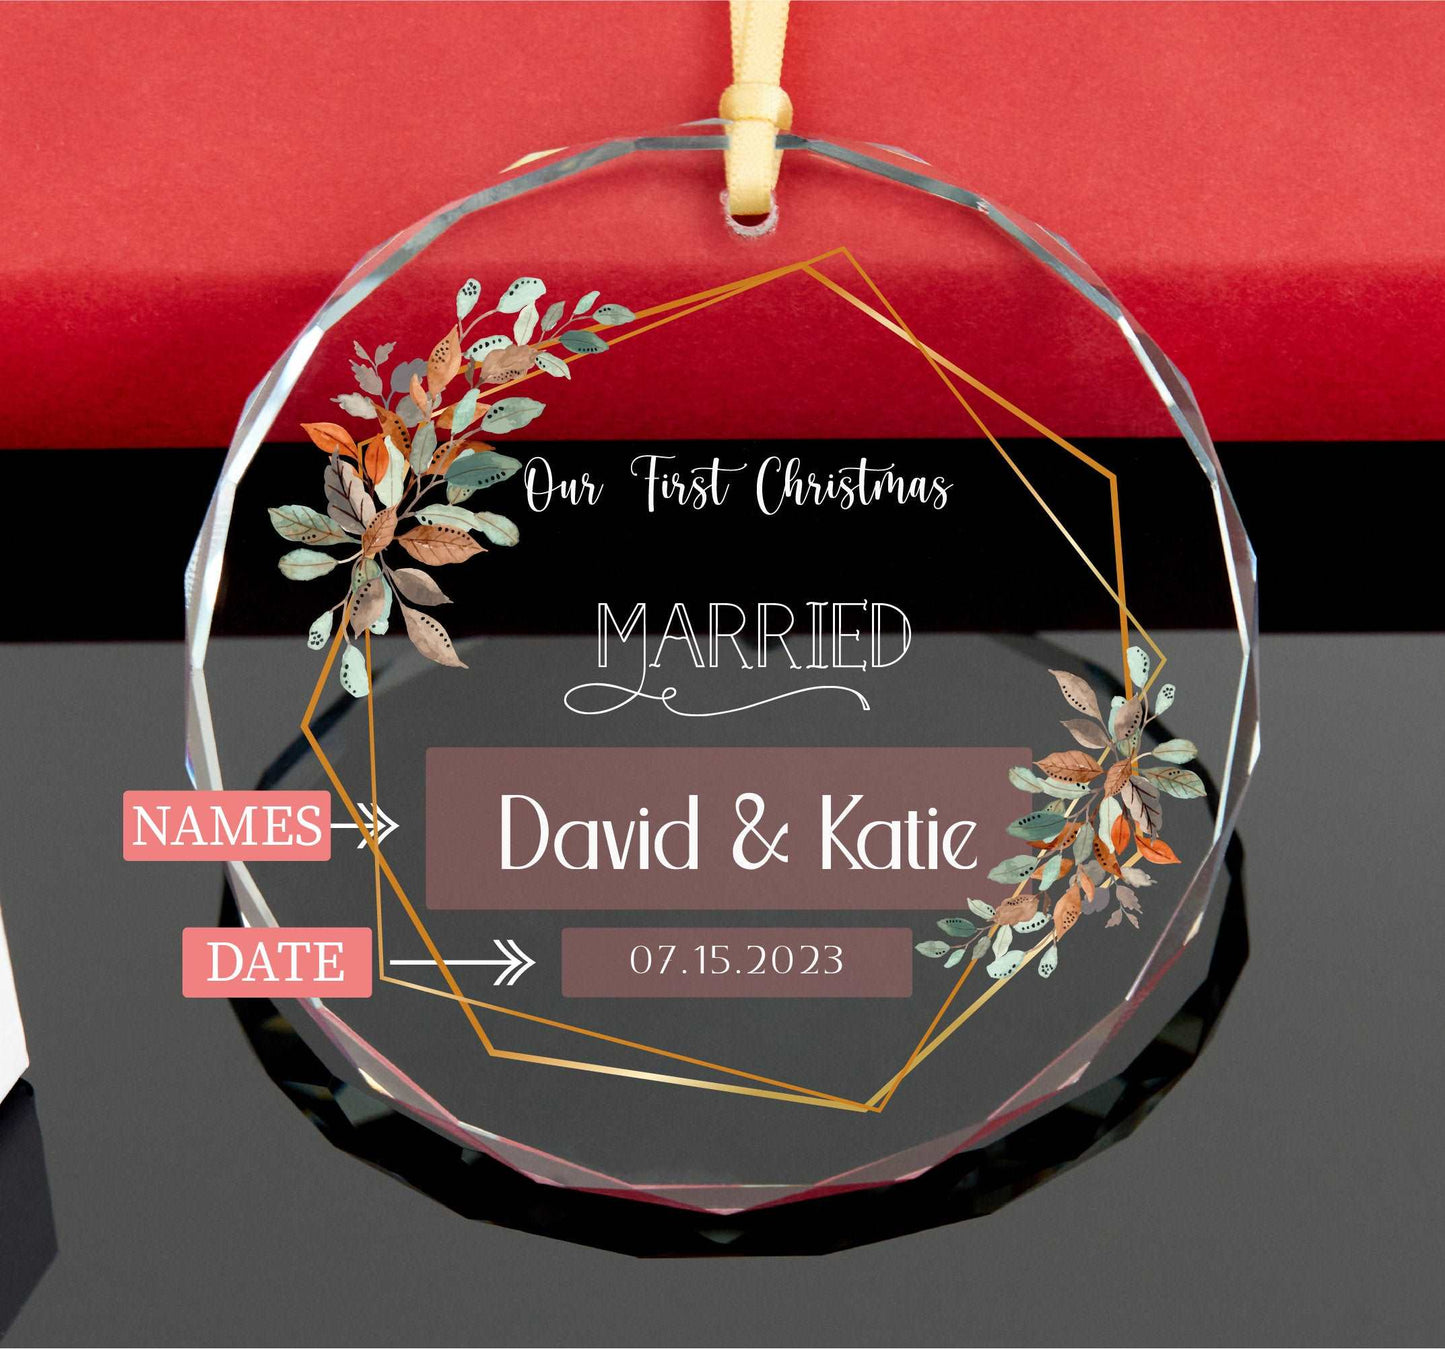 Our First Christmas Married Ornament • Christmas Ornament • Engagement Gift • Mr and Mrs Ornament • Personalized Gift • Together Gift 